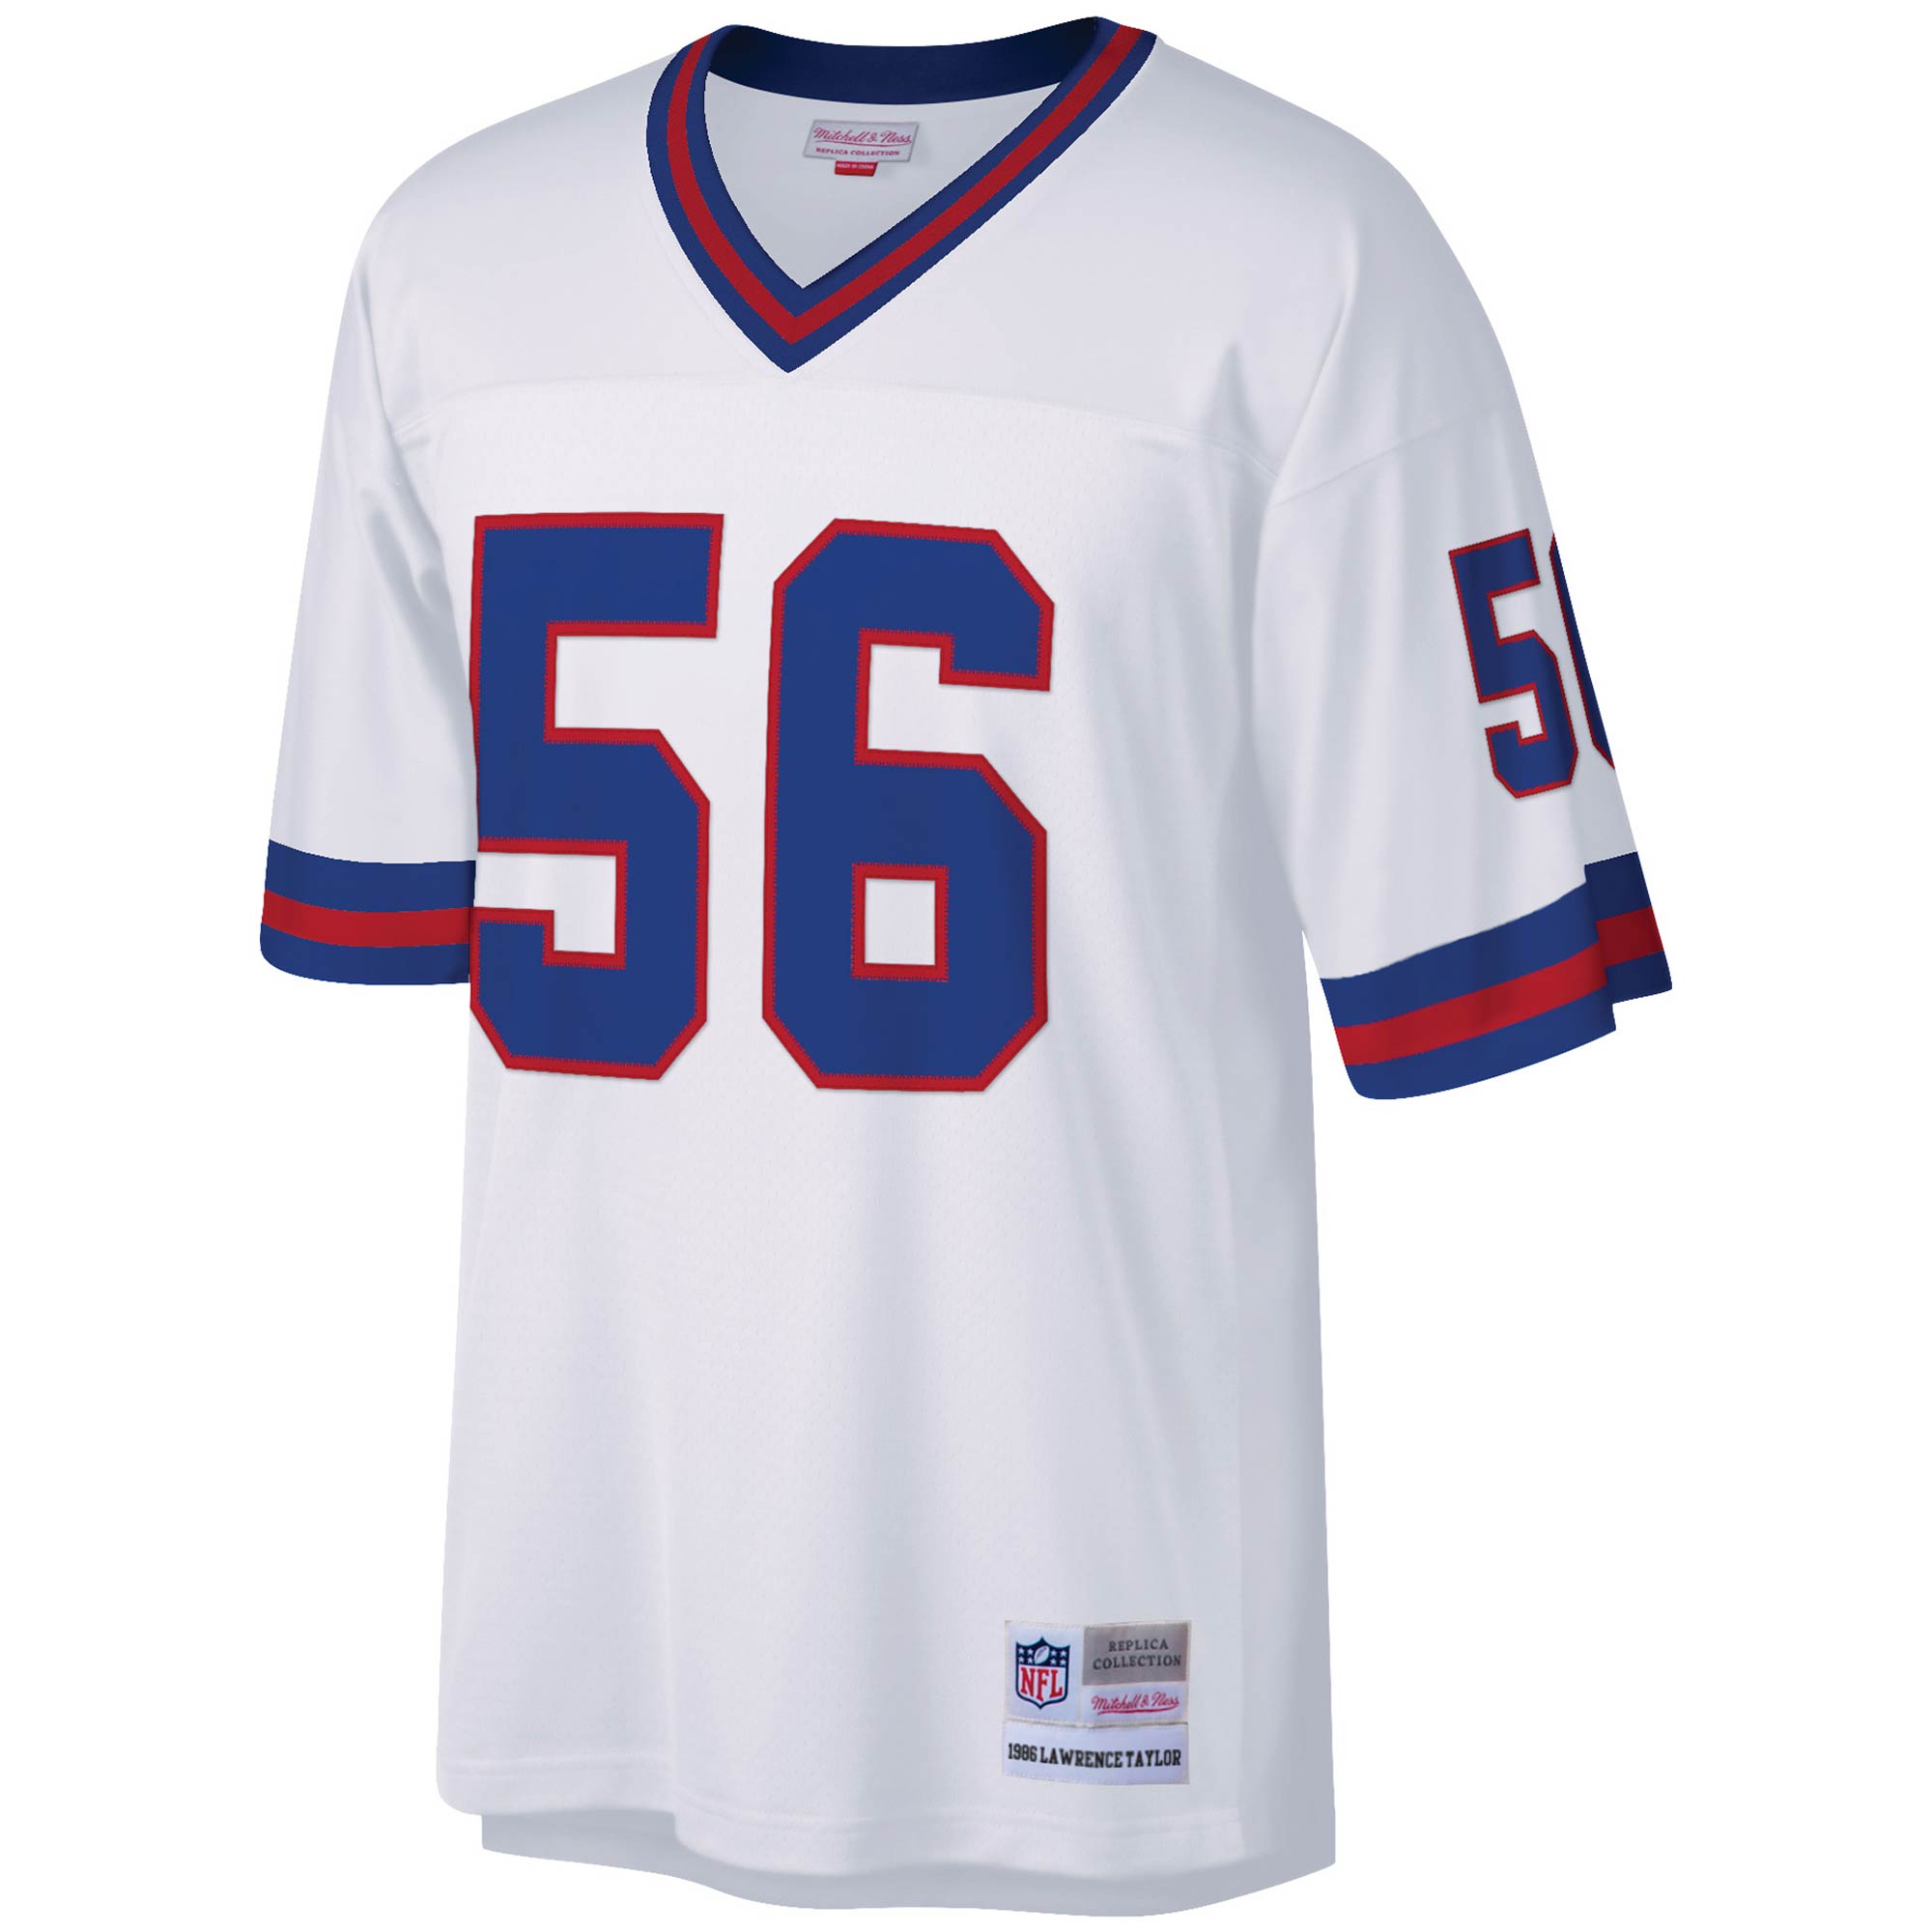 Authentic NY Giants Lawrence Taylor Jersey